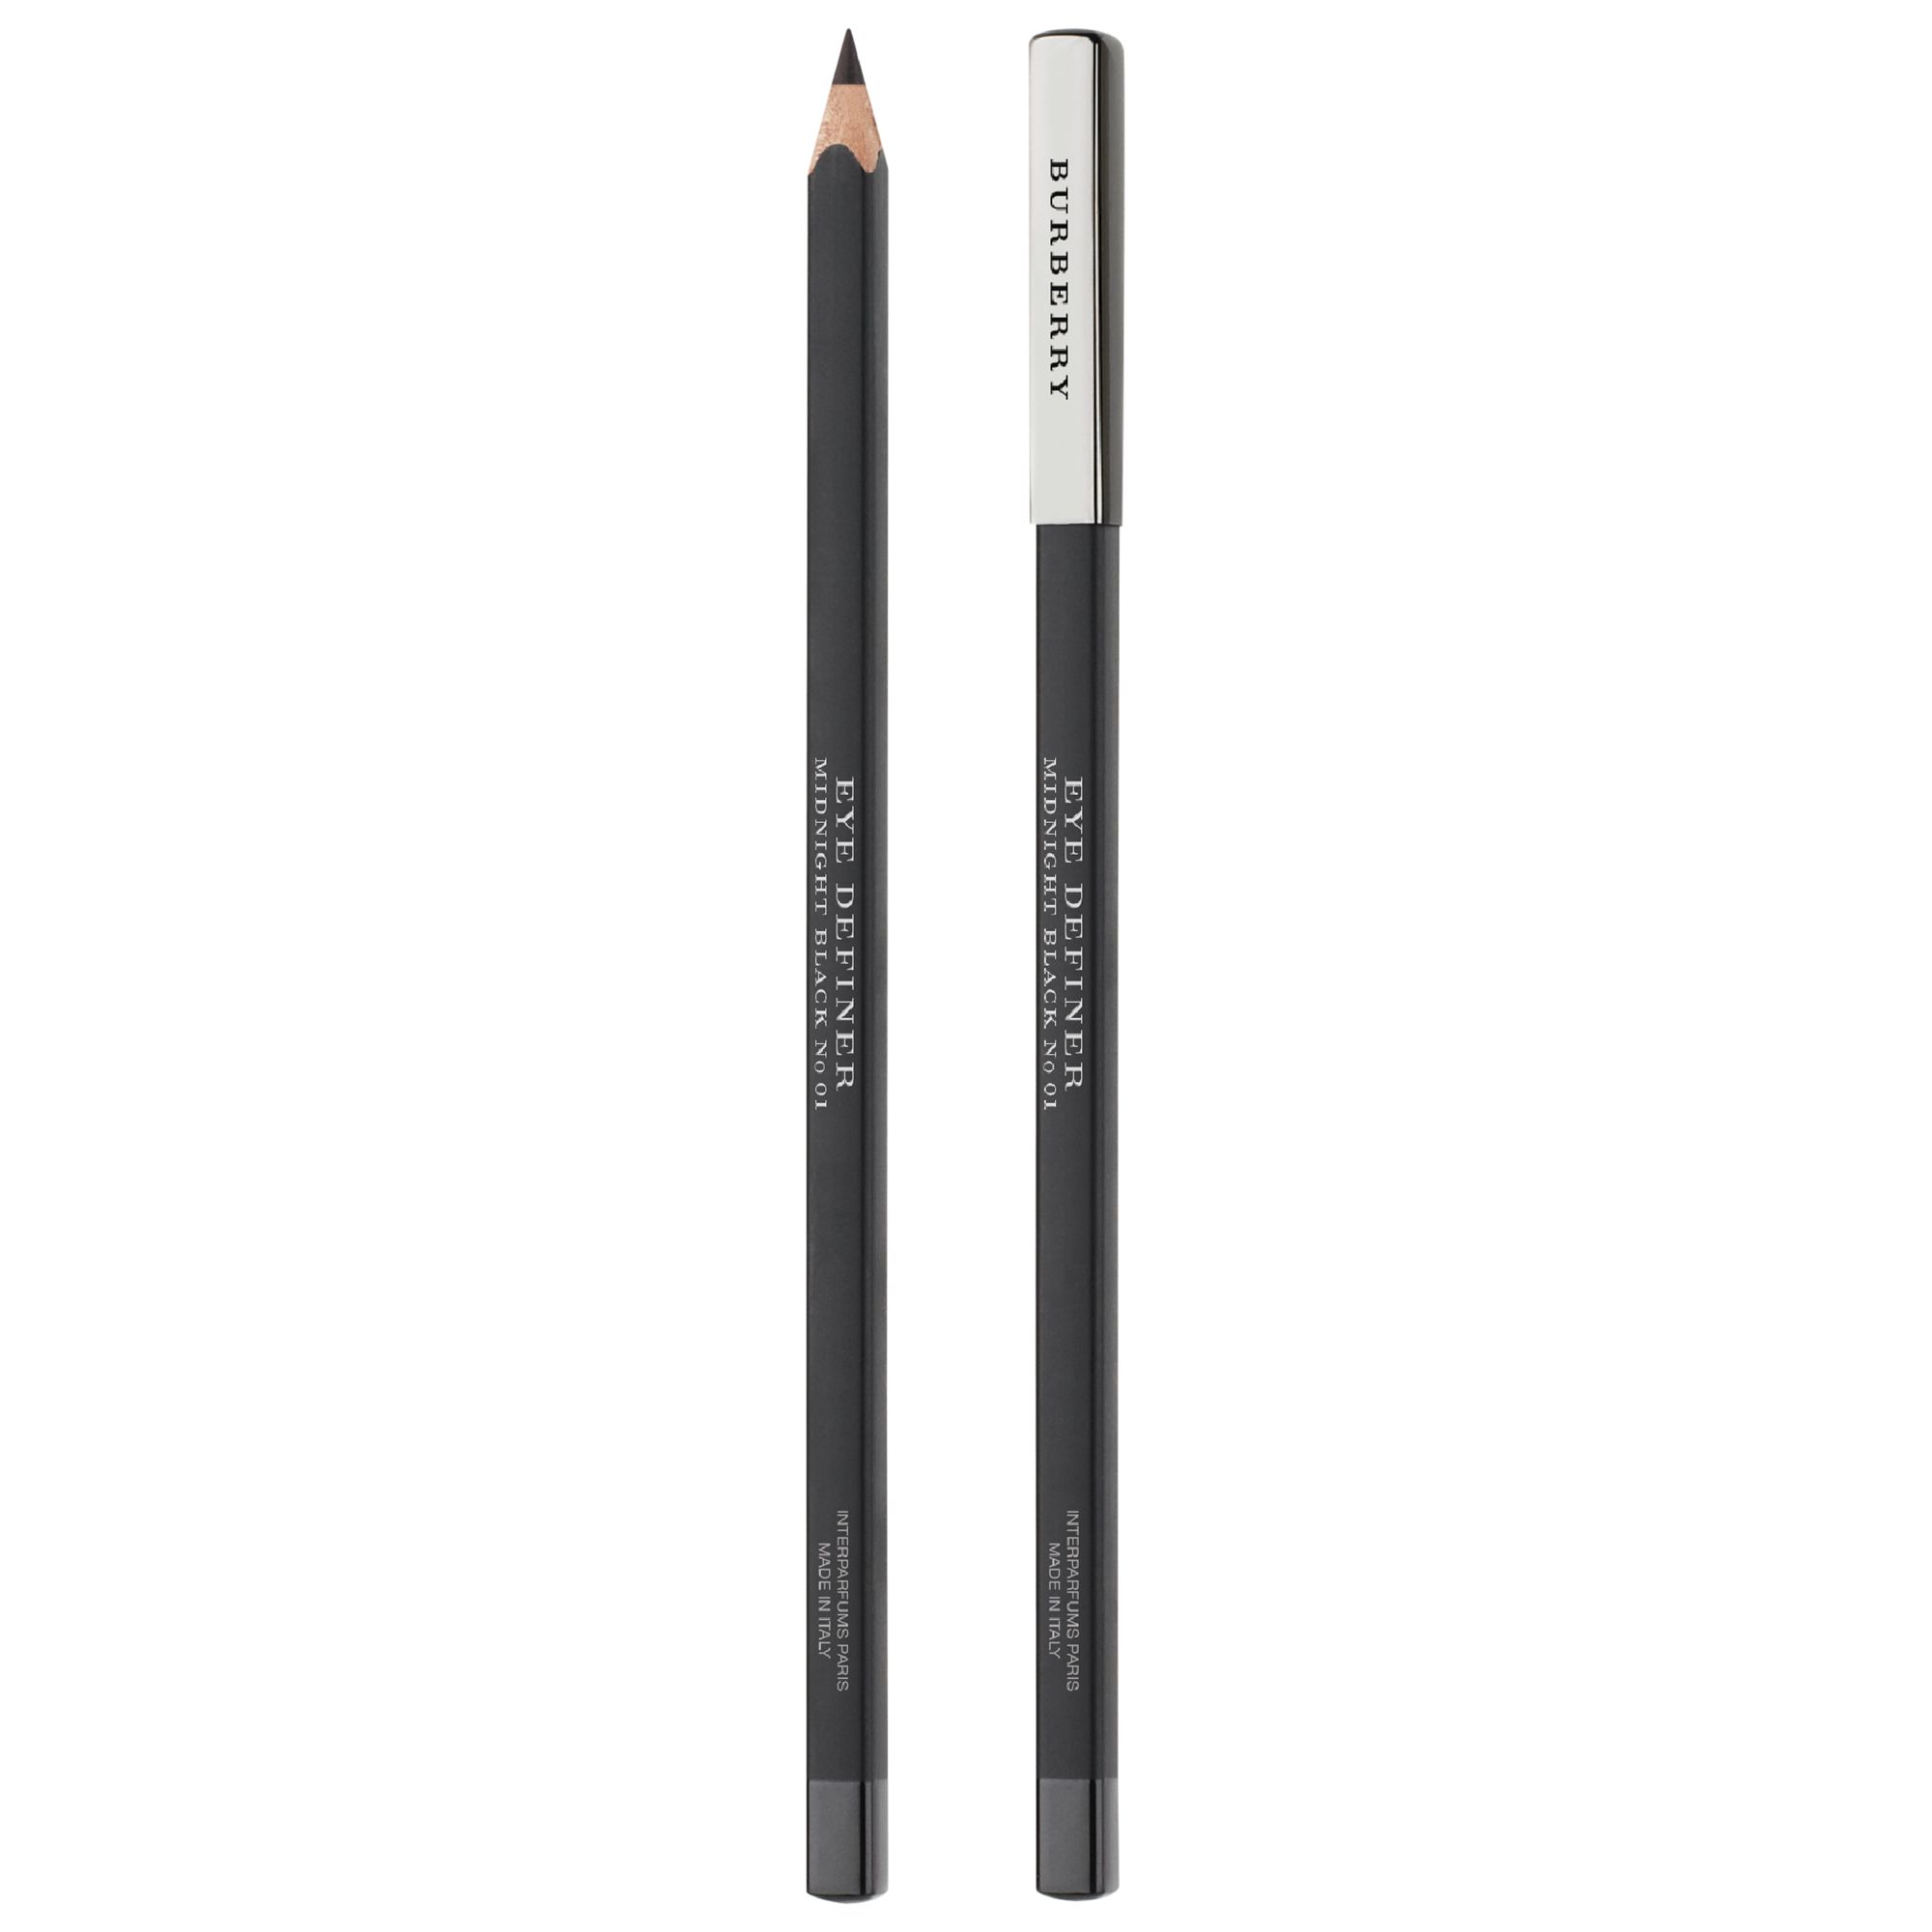 shop for Burberry Beauty Eye Definer at Shopo